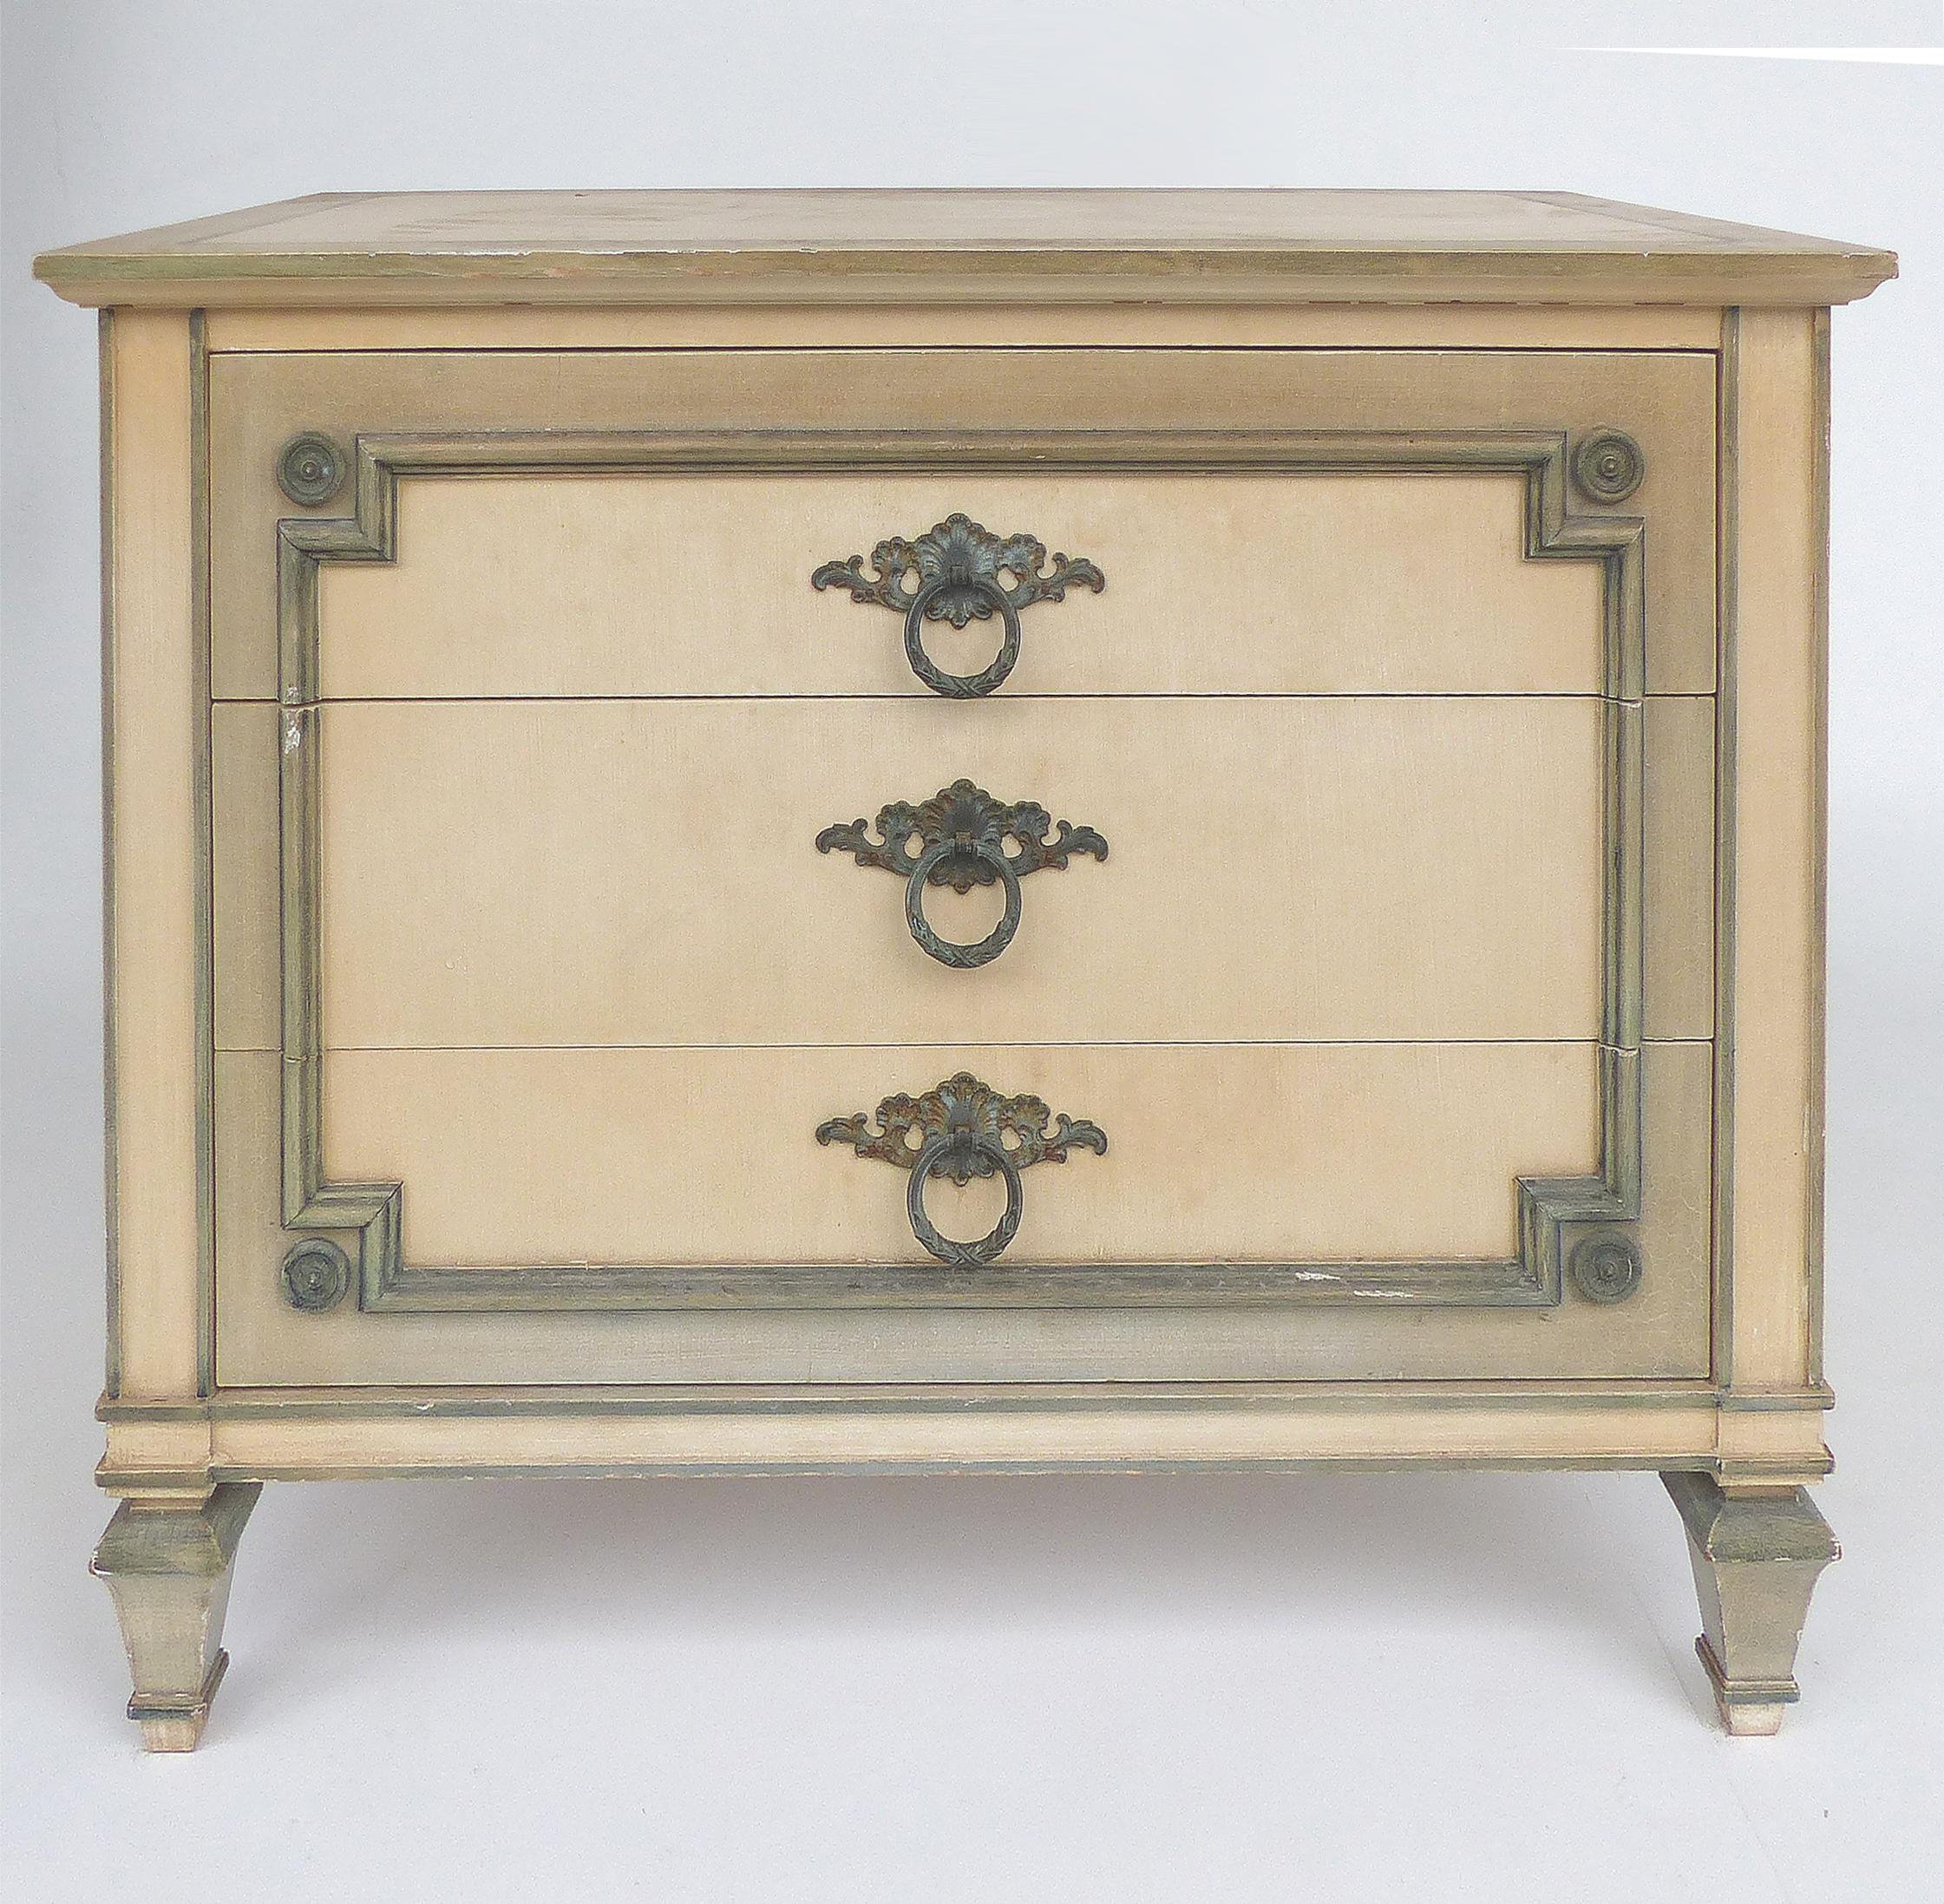 Neoclassical John Widdicomb Hand Painted Night Tables with Drawers, Pair